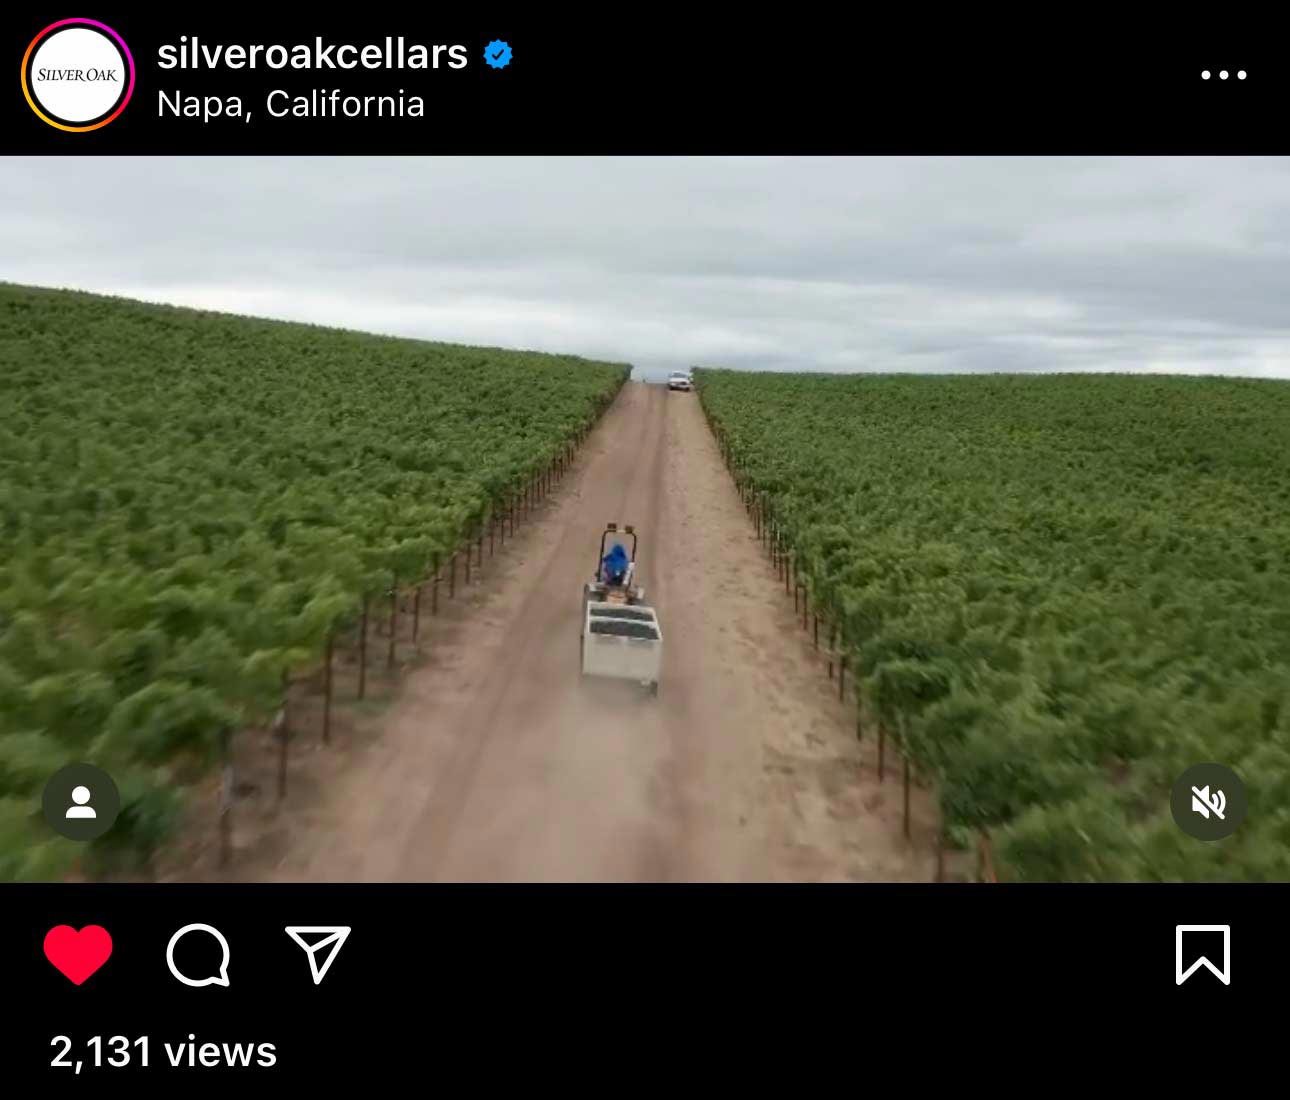 Tractor carrying grapes during harvest for Silver Oak Cellars on Instagram.